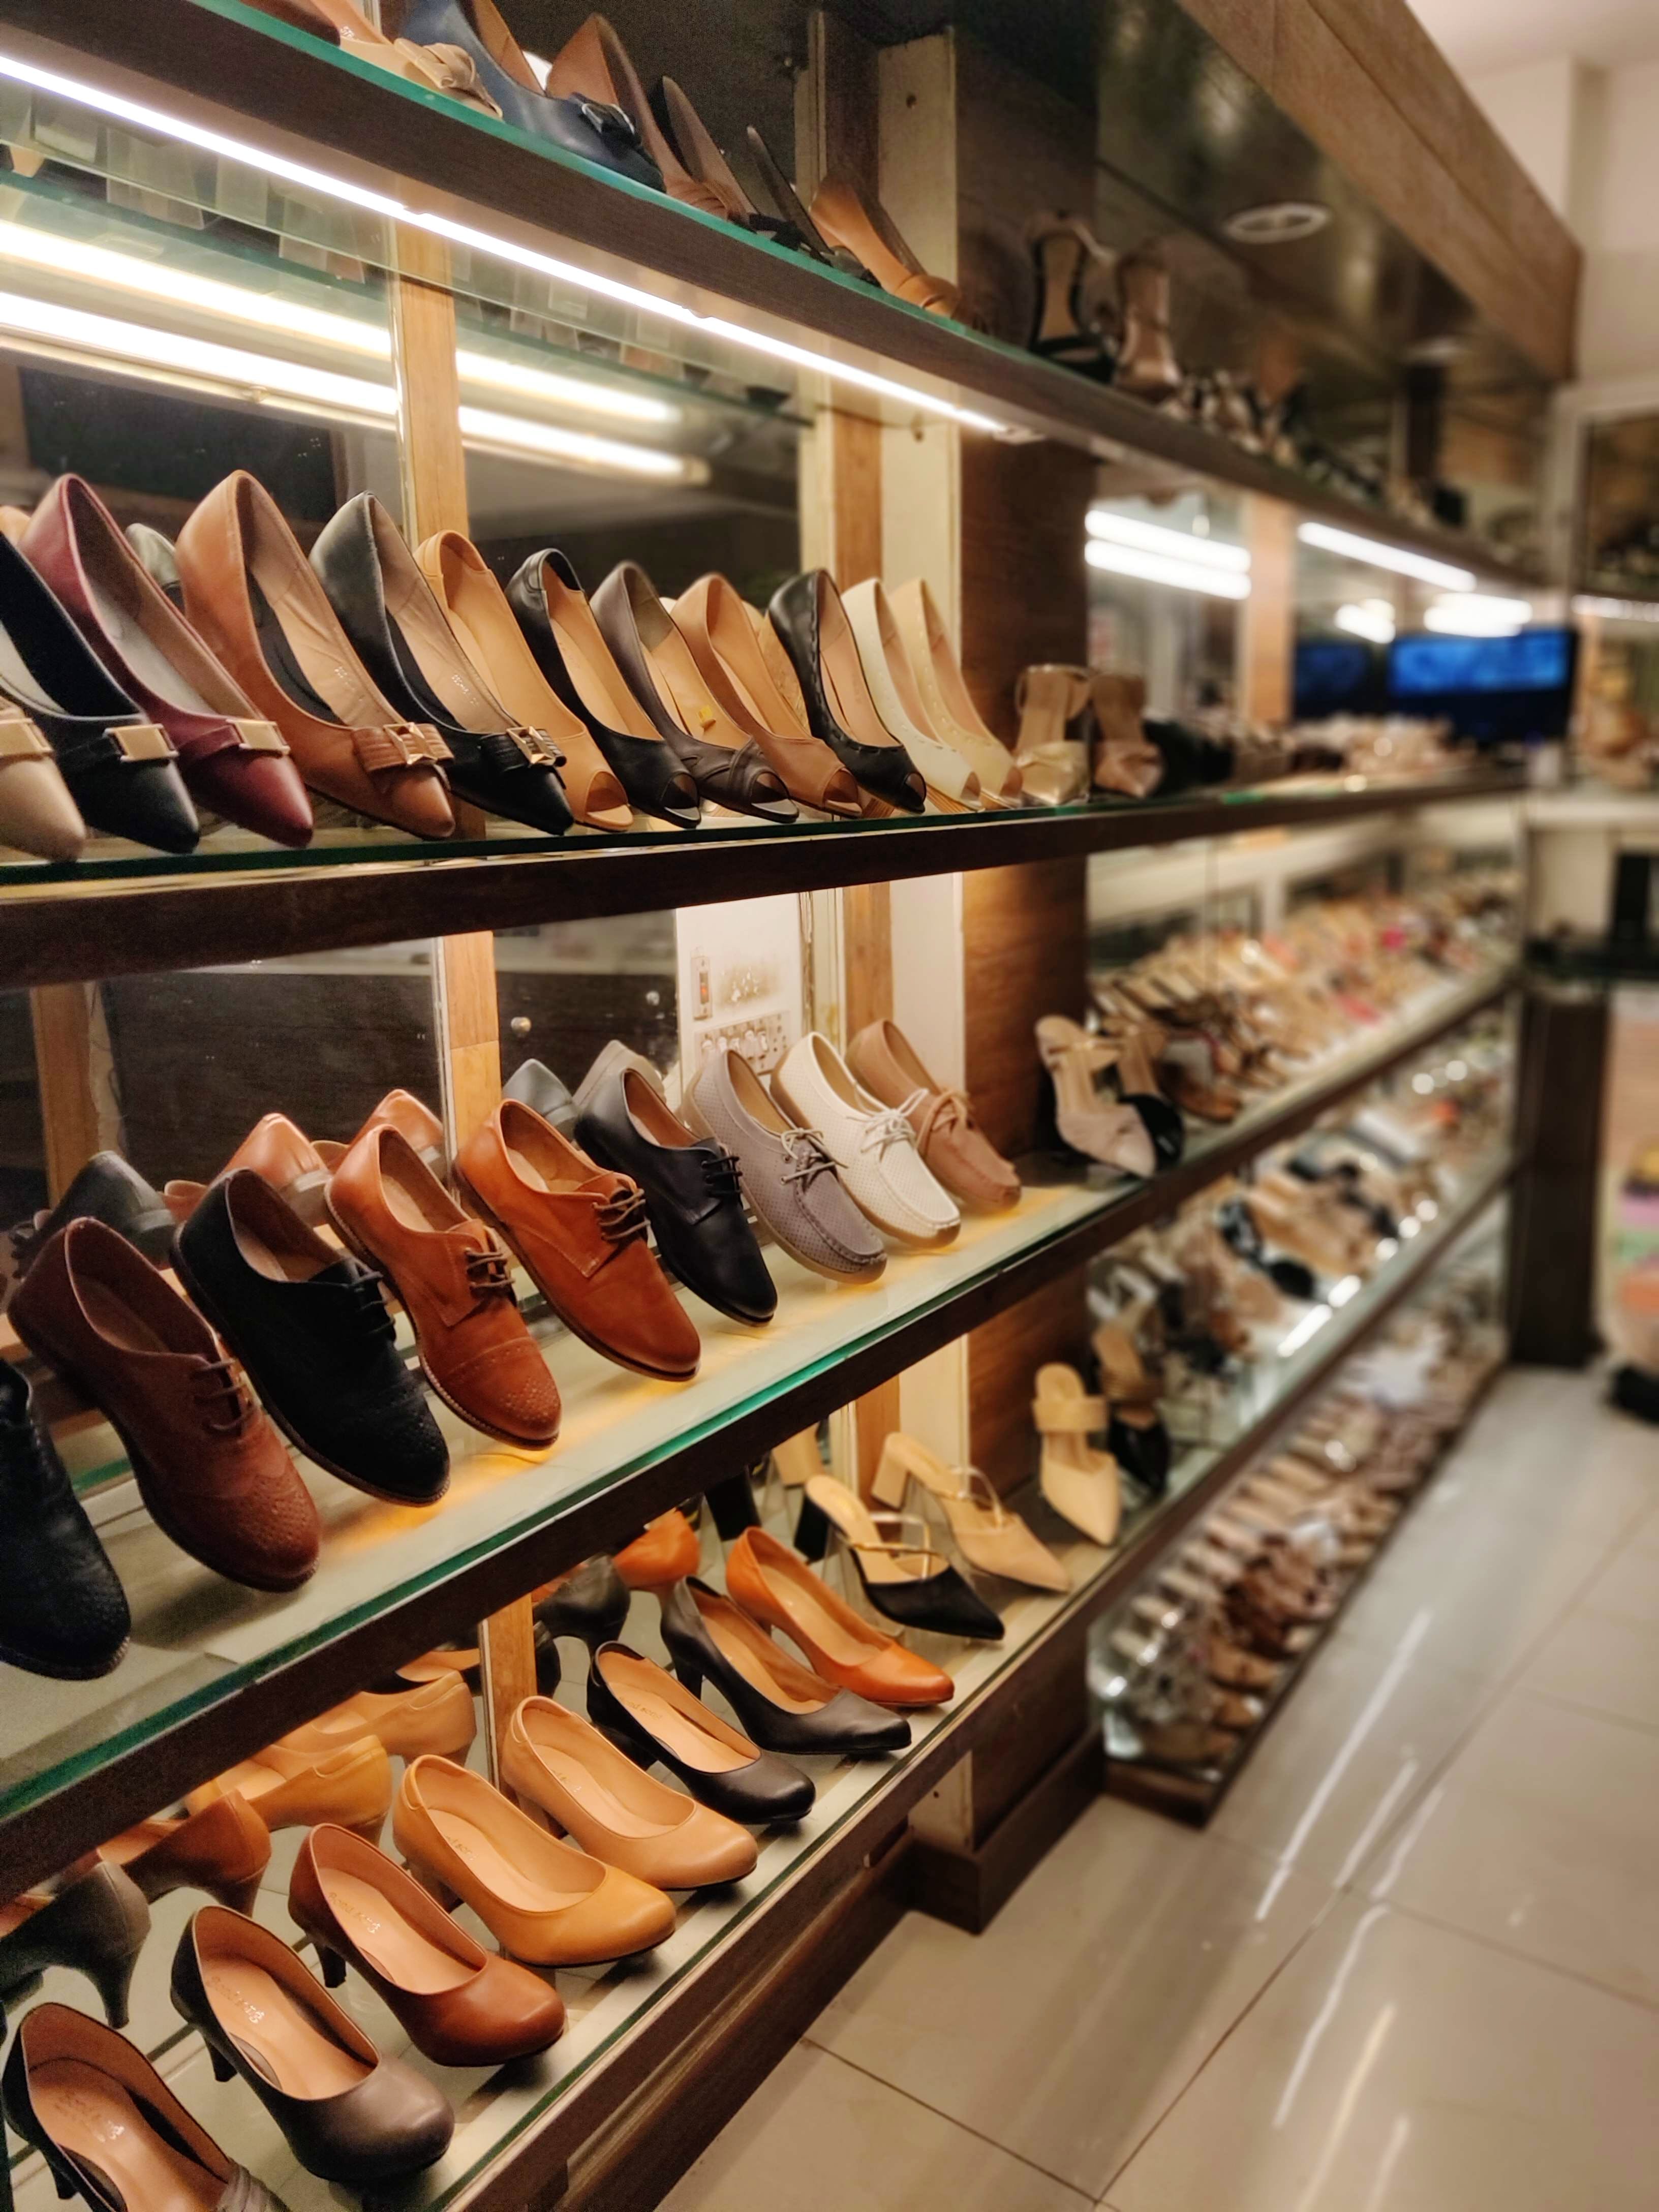 Bakery,Footwear,Retail,Building,Inventory,Shoe store,Outlet store,Shoe,Collection